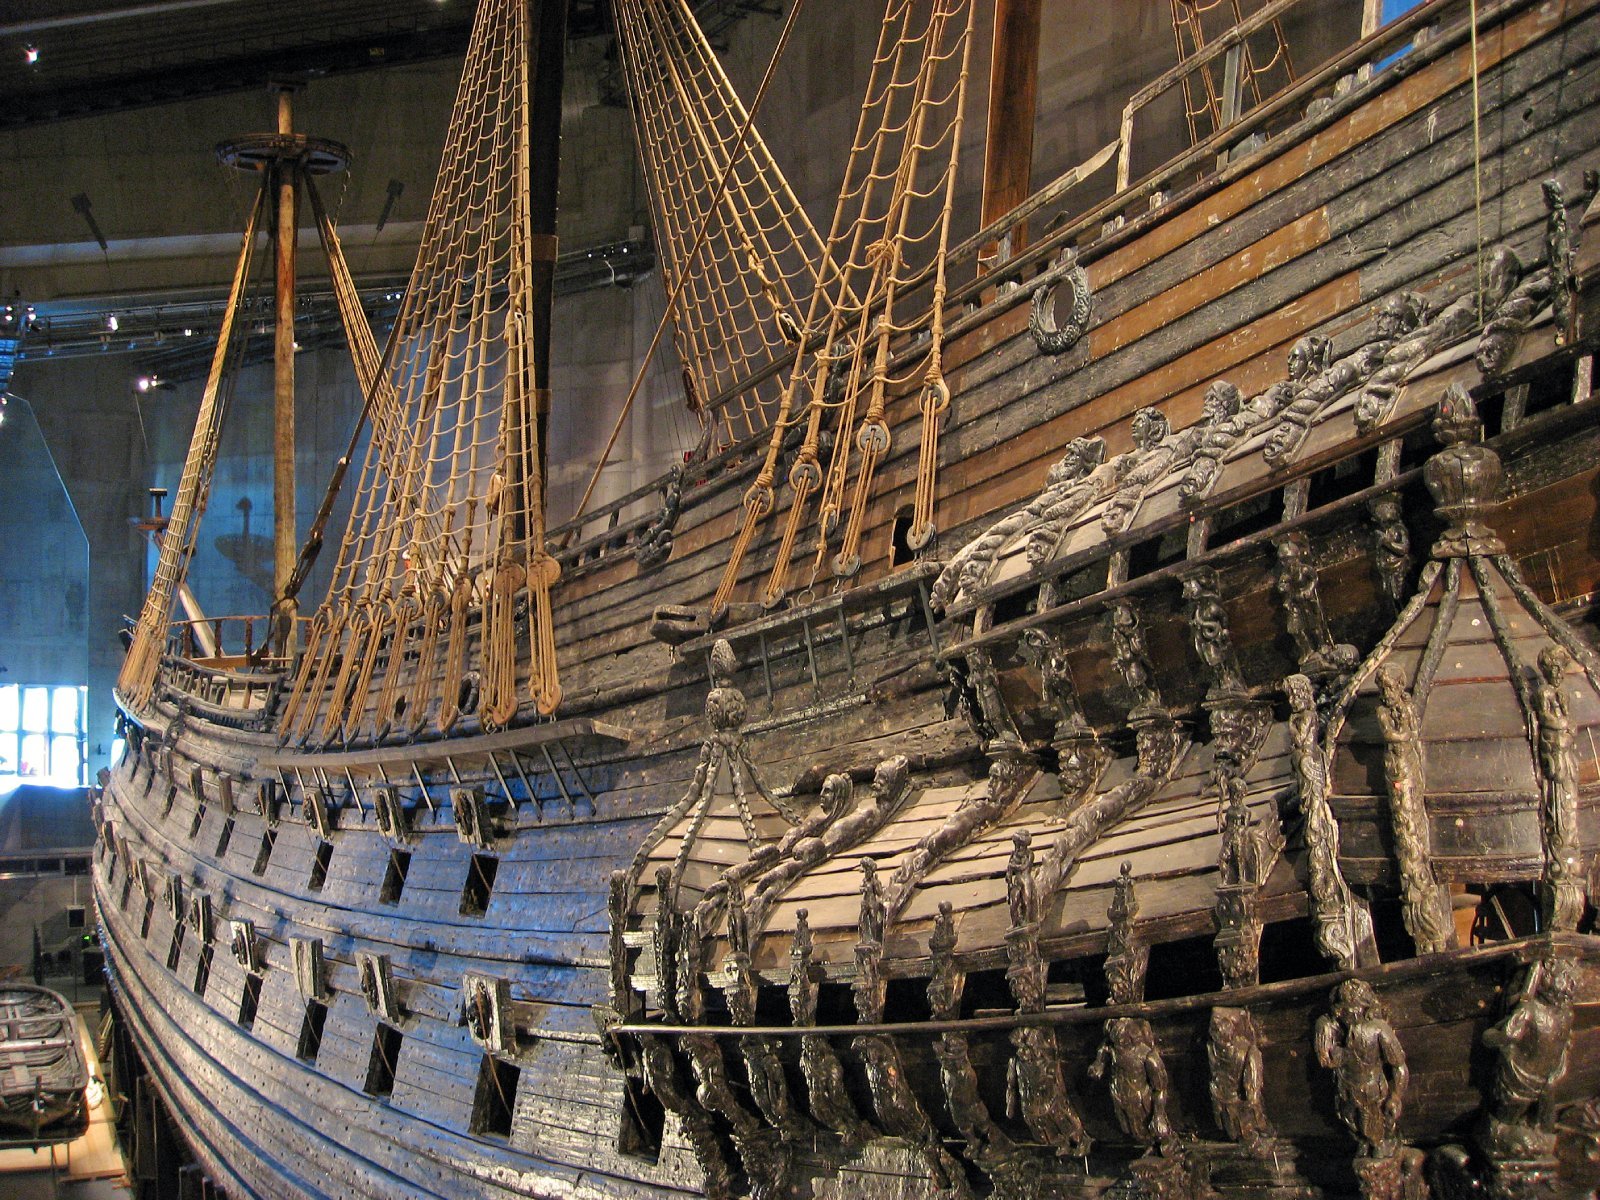 <p class="wp-caption-text">Image Credit: Shutterstock / Willem Tims</p>  <p><span>The Vasa is a 17th-century Swedish warship that famously sank on its maiden voyage in 1628, just minutes after setting sail from Stockholm. It remained underwater for over 300 years before being salvaged in 1961 in a remarkably well-preserved state. Today, the Vasa is housed in the Vasa Museum in Stockholm, offering visitors a unique opportunity to explore a nearly intact ship from the early modern period.</span></p> <p><span>The museum provides insights into 17th-century maritime warfare, shipbuilding, and everyday life on board. The Vasa’s intricate carvings and the personal belongings of its crew members bring the era to life, making it a fascinating visit for history enthusiasts and casual visitors alike.</span></p> <p><b>Insider’s Tip:</b><span> Don’t miss the museum’s guided tours, which offer in-depth stories about the ship’s history, its recovery, and the conservation efforts that have allowed it to be displayed today.</span></p> <p><b>When to Travel:</b><span> Stockholm is charming year-round, but the best time to visit is during the summer, from June to August, when the city enjoys its warmest weather.</span></p> <p><b>How to Get There:</b><span> The Vasa Museum is located on the island of Djurgården in Stockholm and is easily accessible by public transport, bicycle, or on foot from the city center.</span></p>